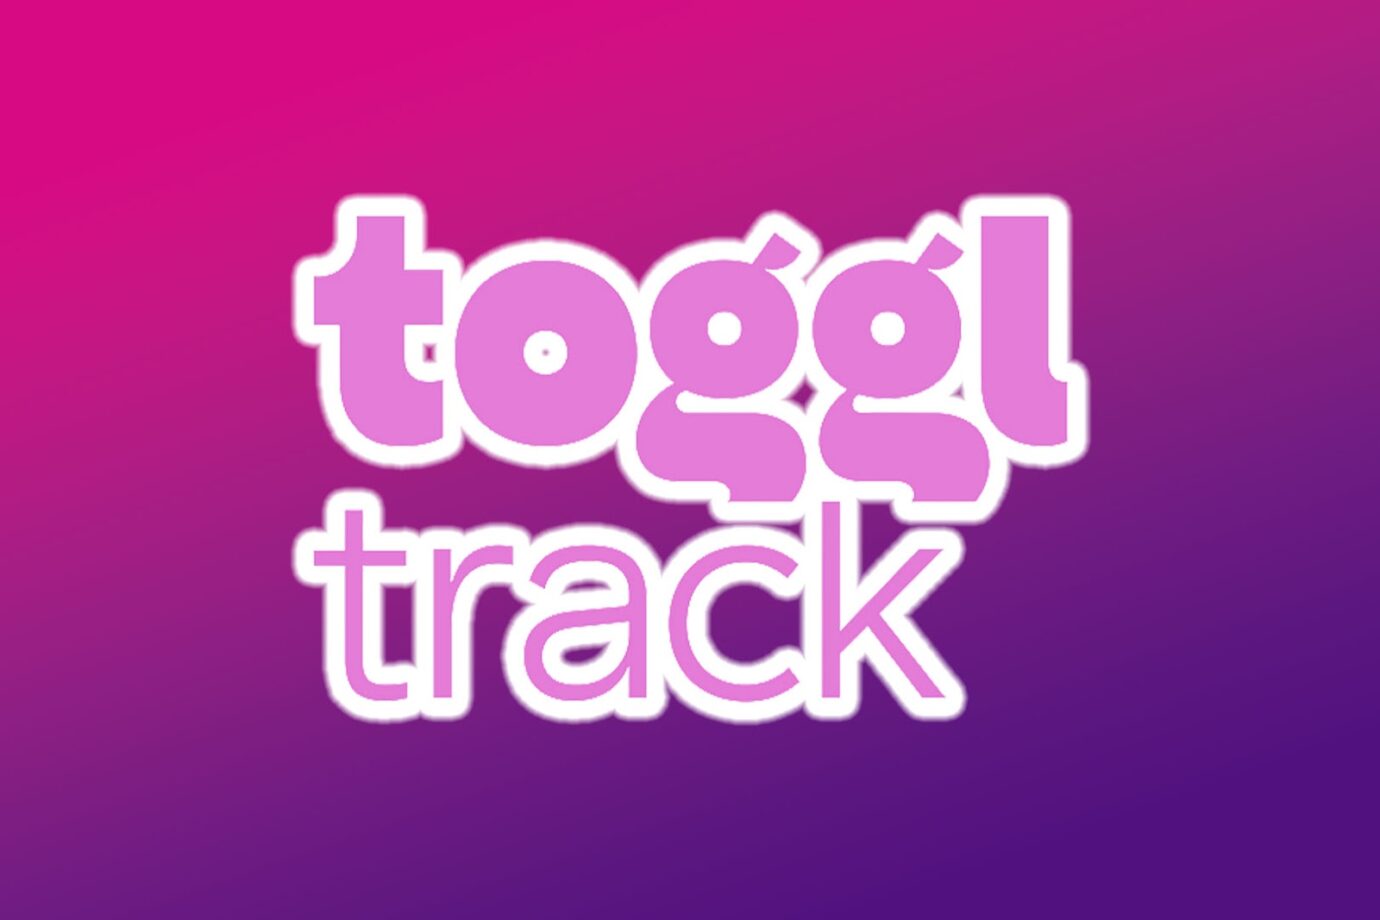 Toggl Track Best Apps for Virtual Assistants